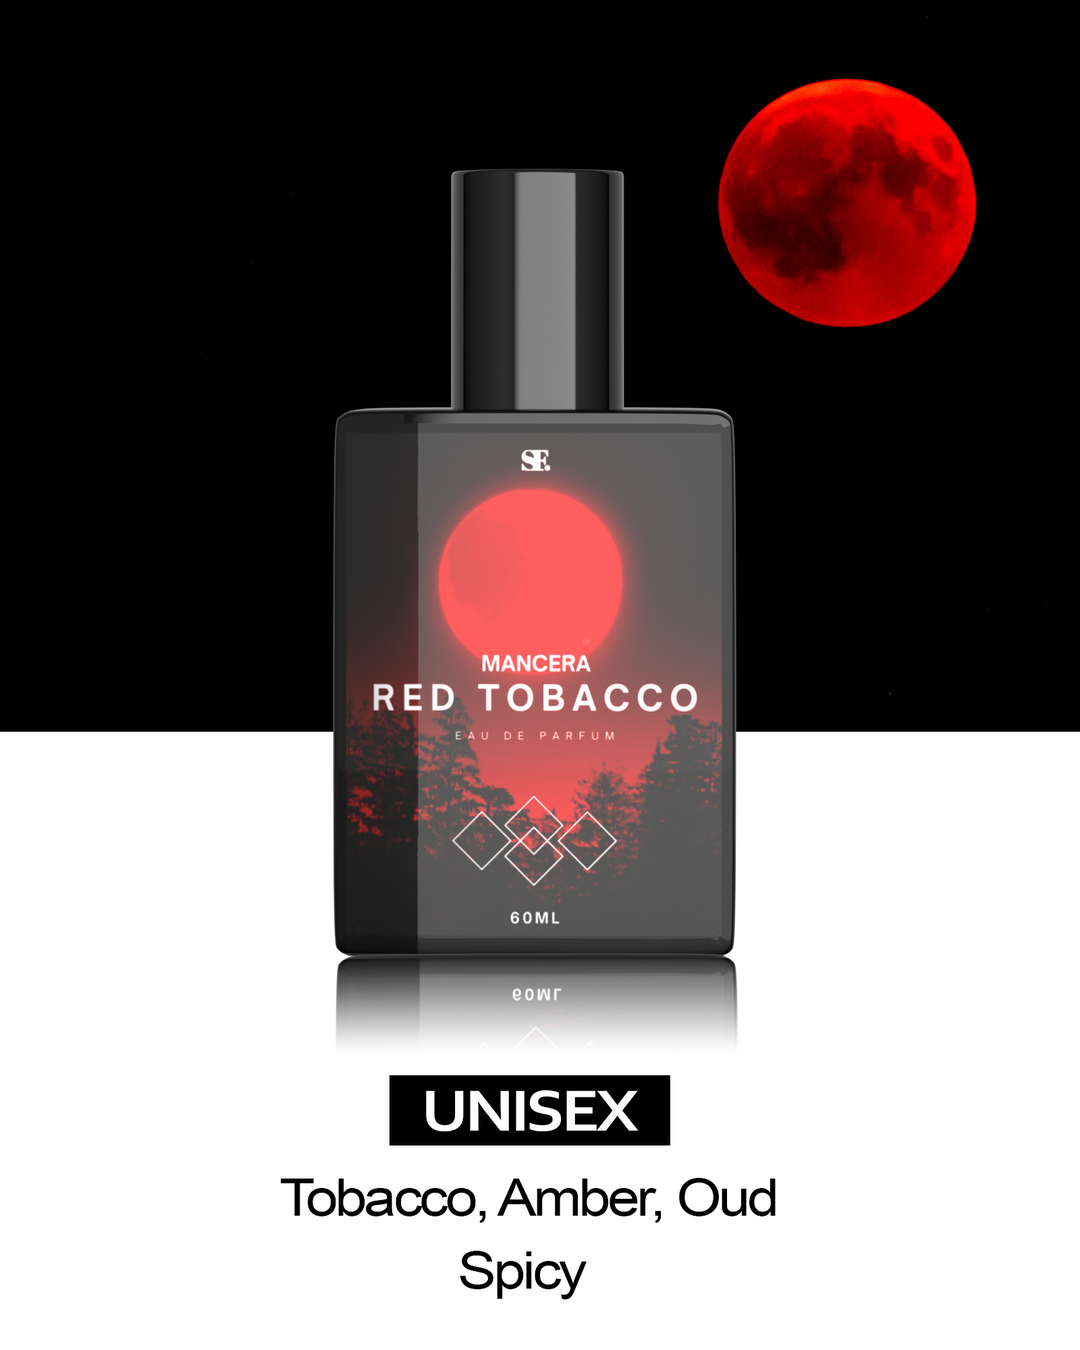 Inspired by Red Tobacco